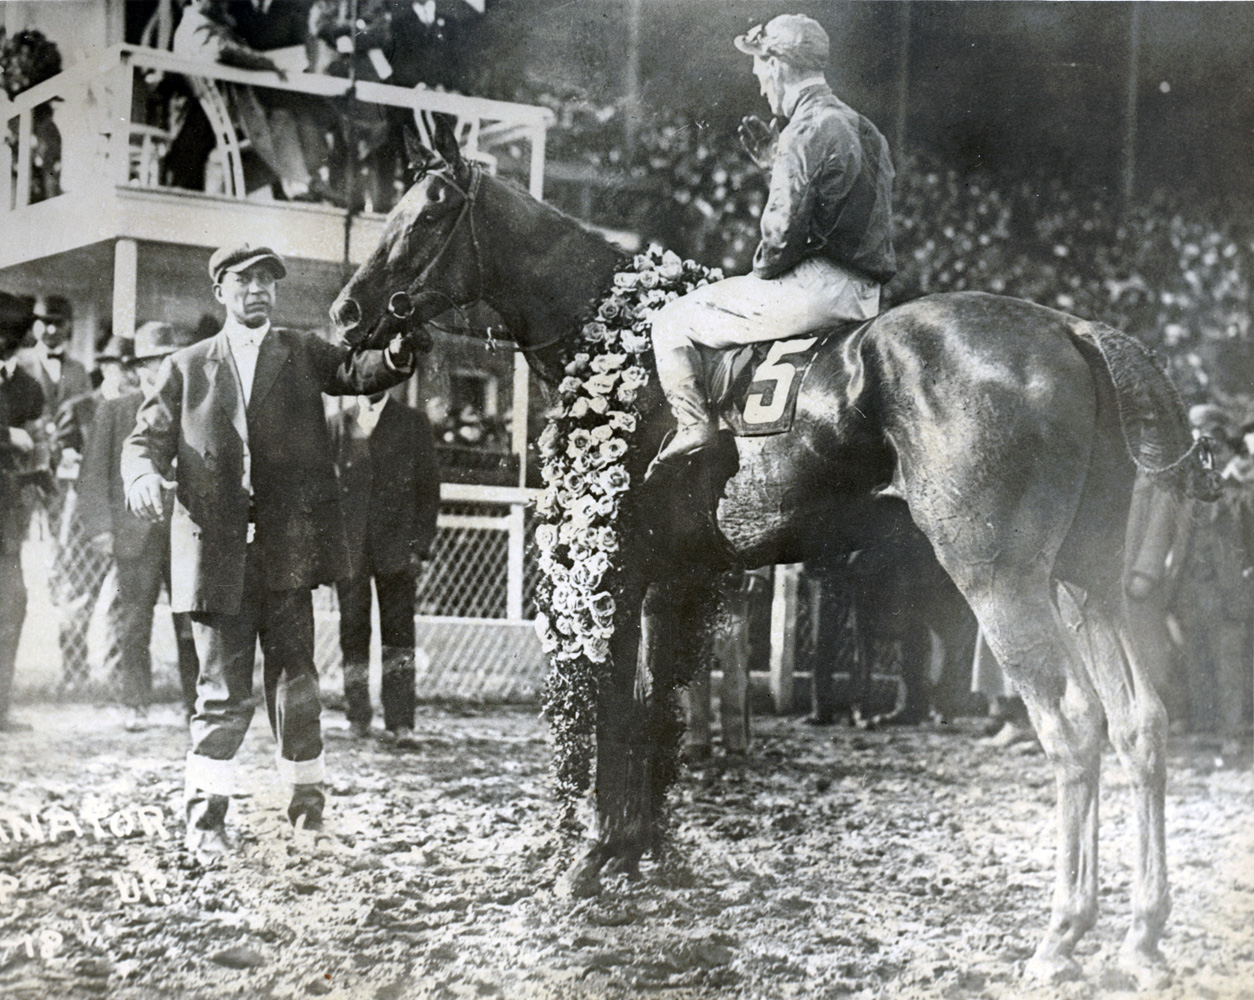 Exterminator (Willie Knapp up) in the winner's circle for the 1918 Kentucky Derby (Museum Collection)